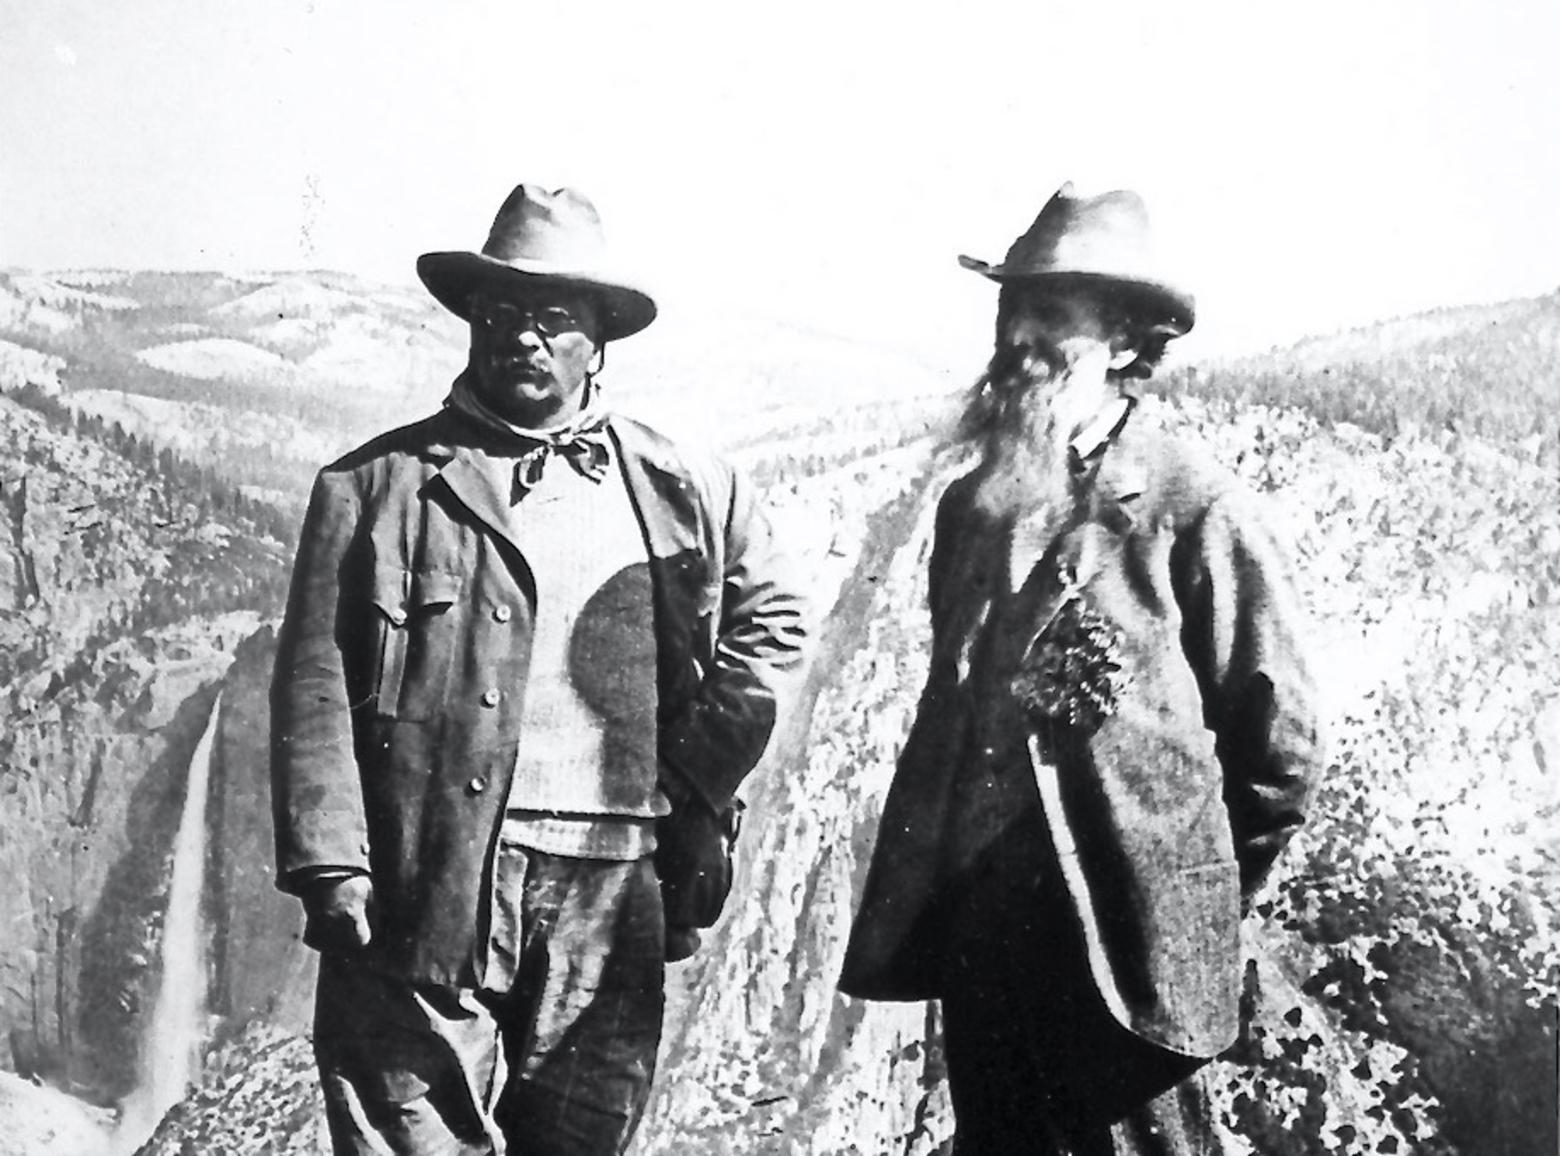 Theodore Roosevelt, left, and John Muir at Glacier Point in Yosemite, 1903. The same year he made a trip to Yellowstone and set down the cornerstone of what is today the Roosevelt Arch at the park's north entrance. During the Yellowstone trip, he shared company with naturalist and essayist John Burroughs. Photo courtesy NPS